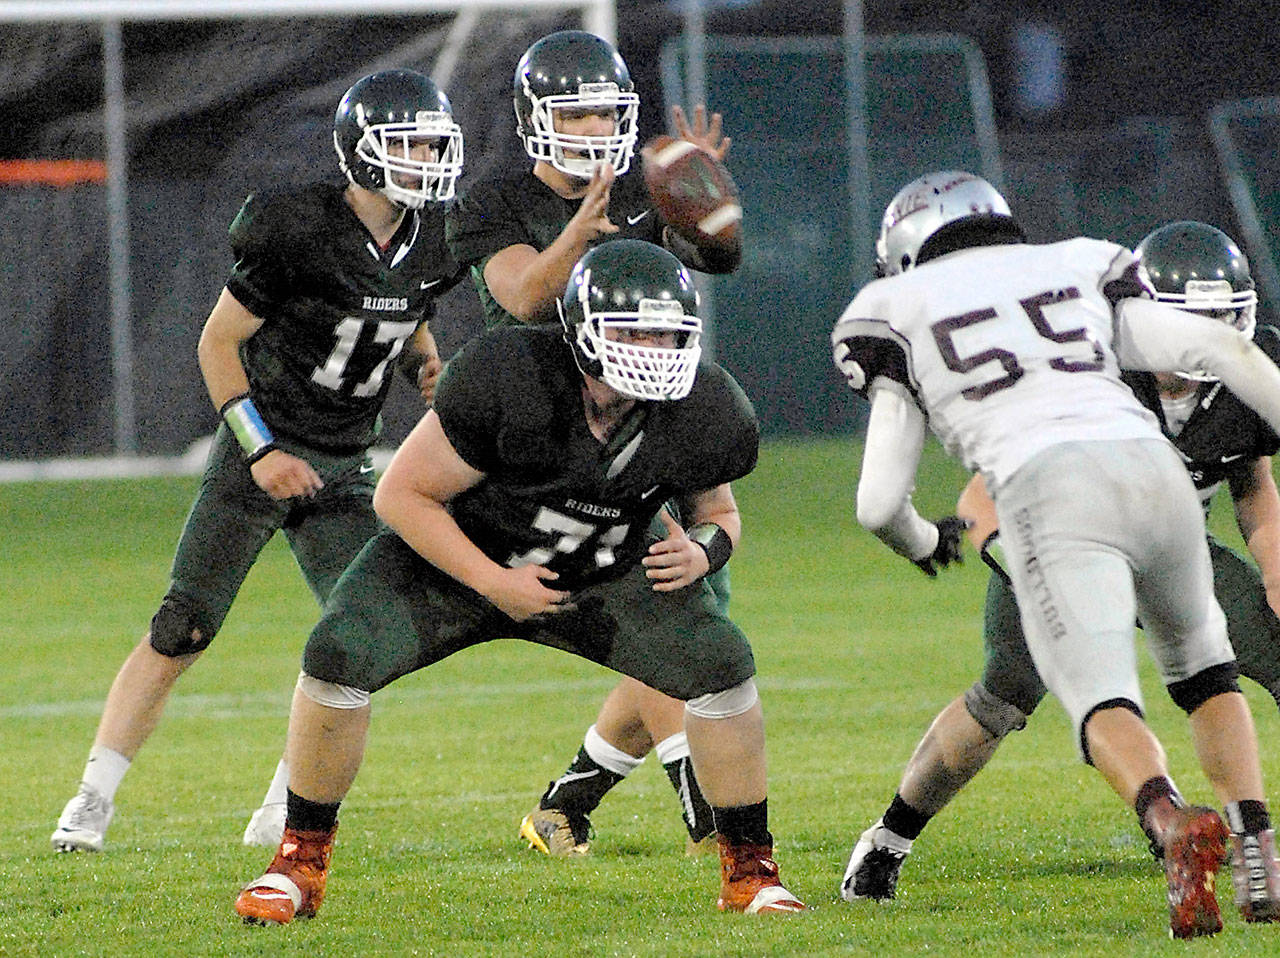 Keith Thorpe/Peninsula Daily News Port Angeles quarterback Brenden Roloson-Hines, center, takes the snap accompanied by teammates Garrett Edwards, left, and Cole Walsh as Montesano defensive lineman Kenny Koonrad defends during a game last September.